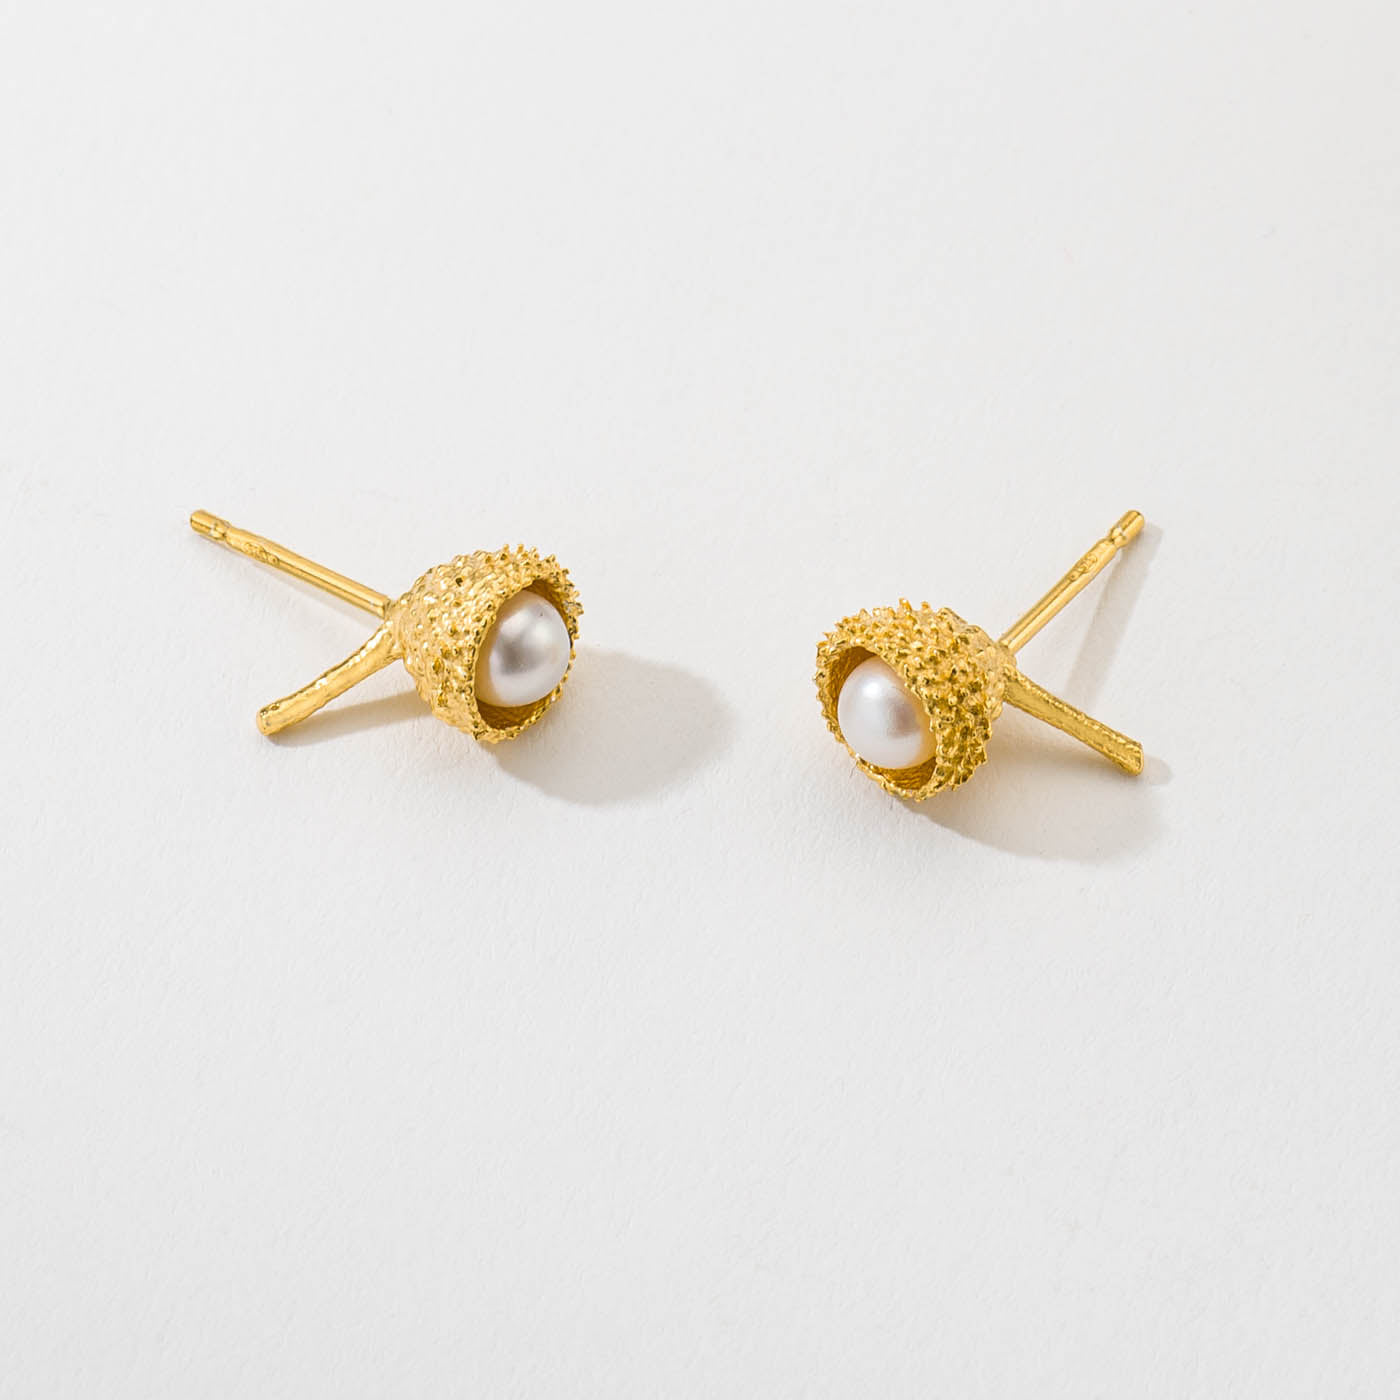 Open tiny seed with twig & pearl - stud earrings - silver 925 - gold plated